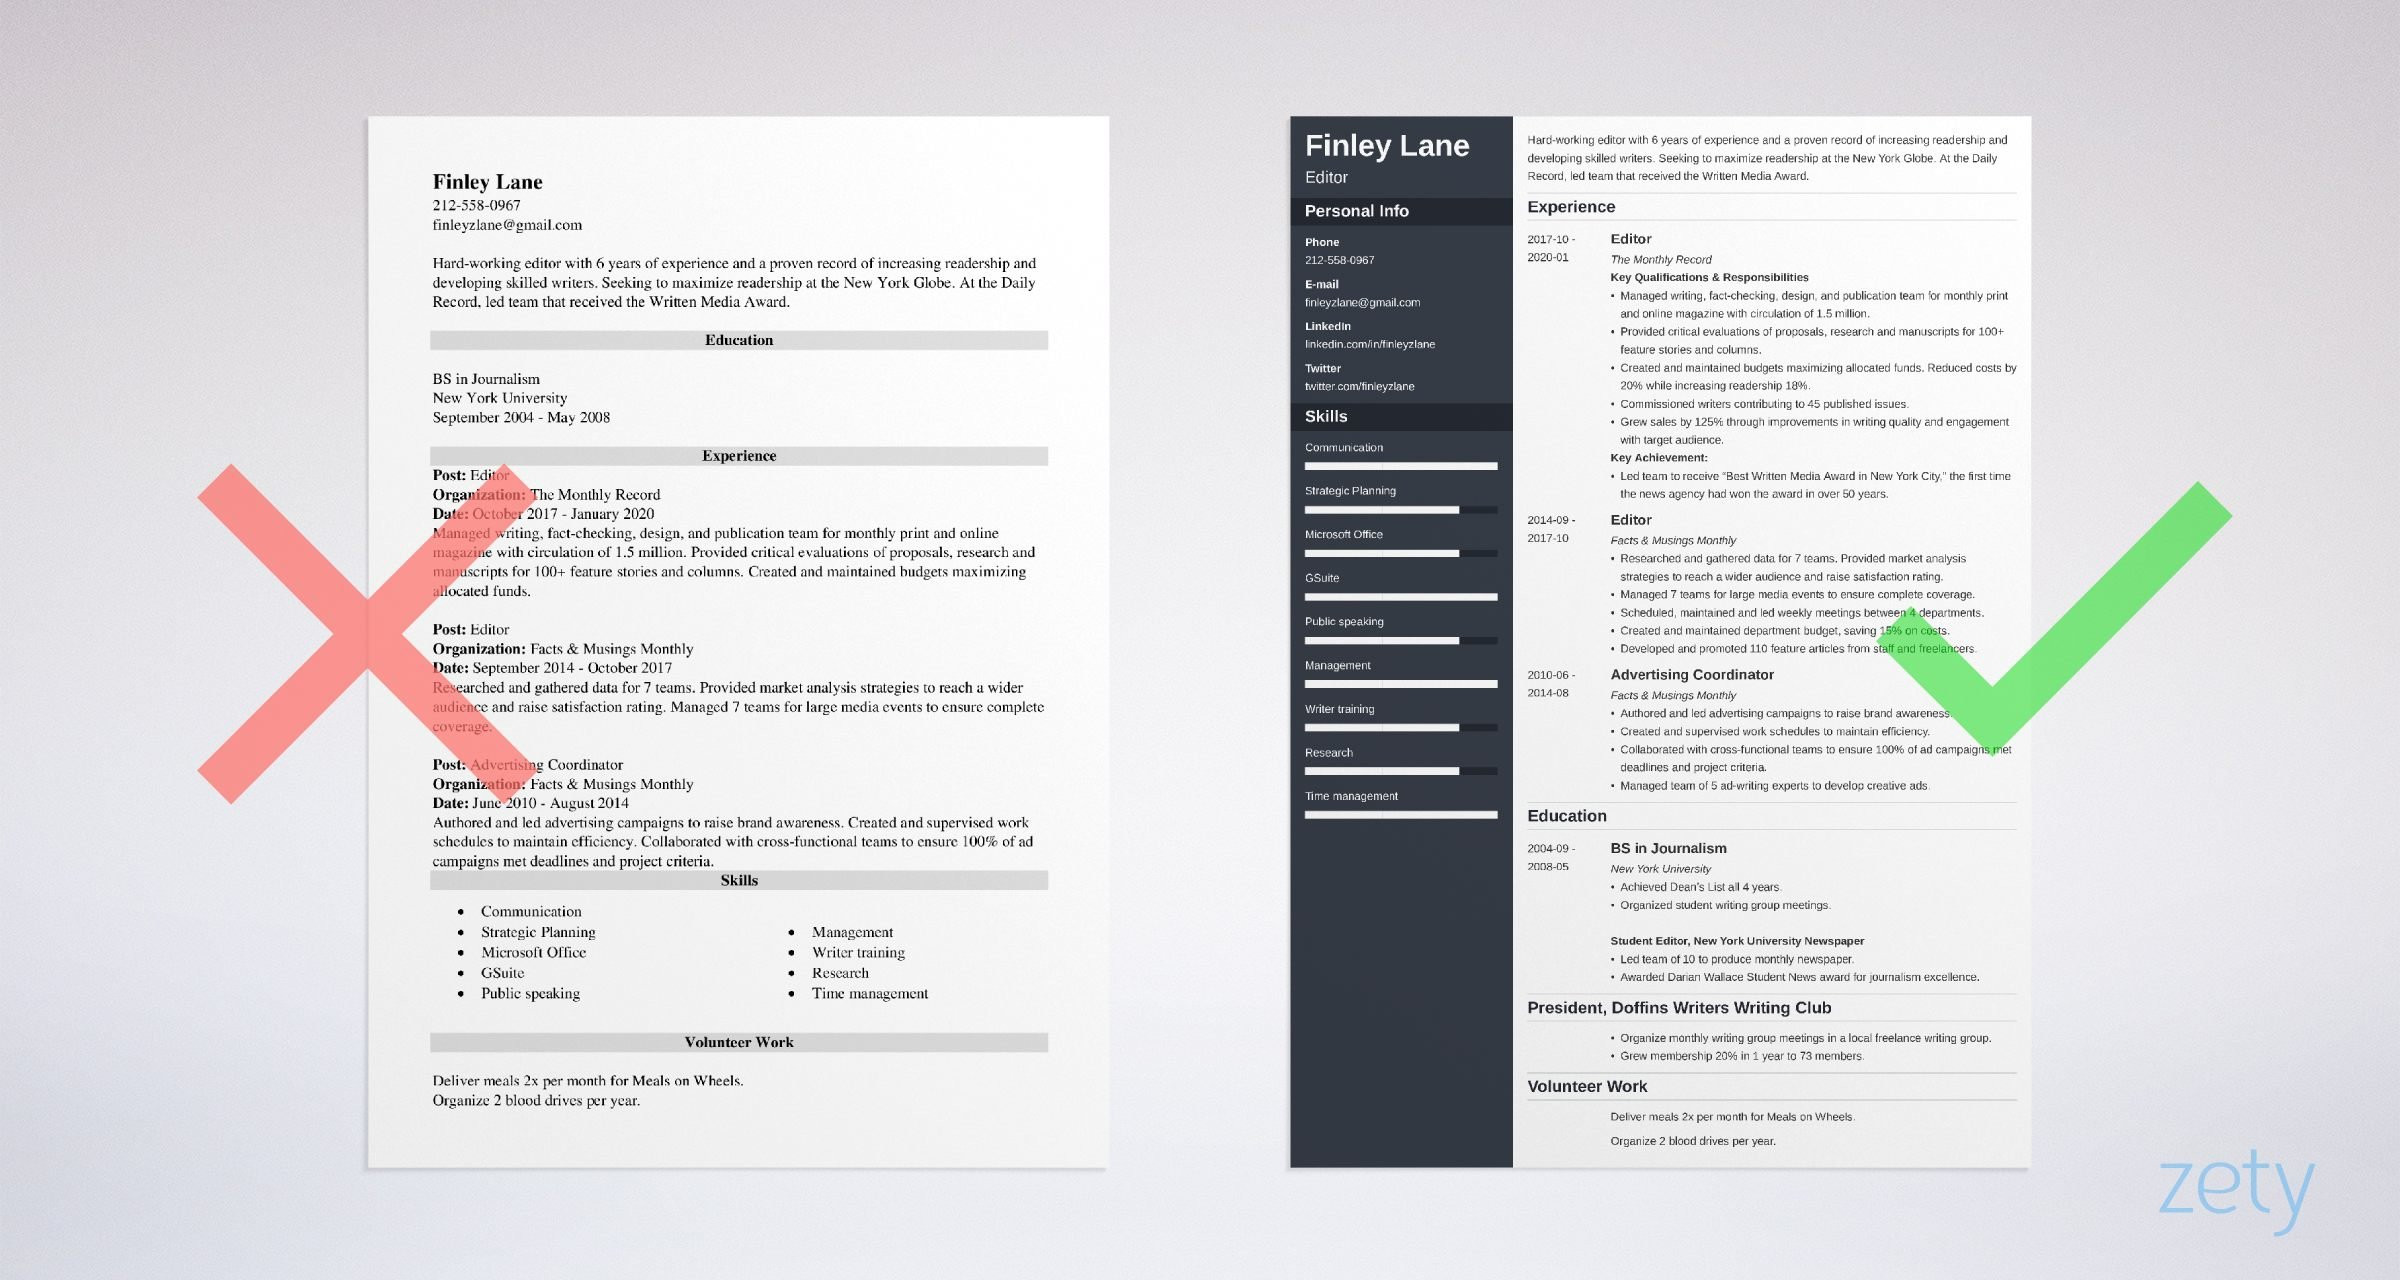 Sample Resume that Can Be Edited Editor Resume: Samples and Writing Guide